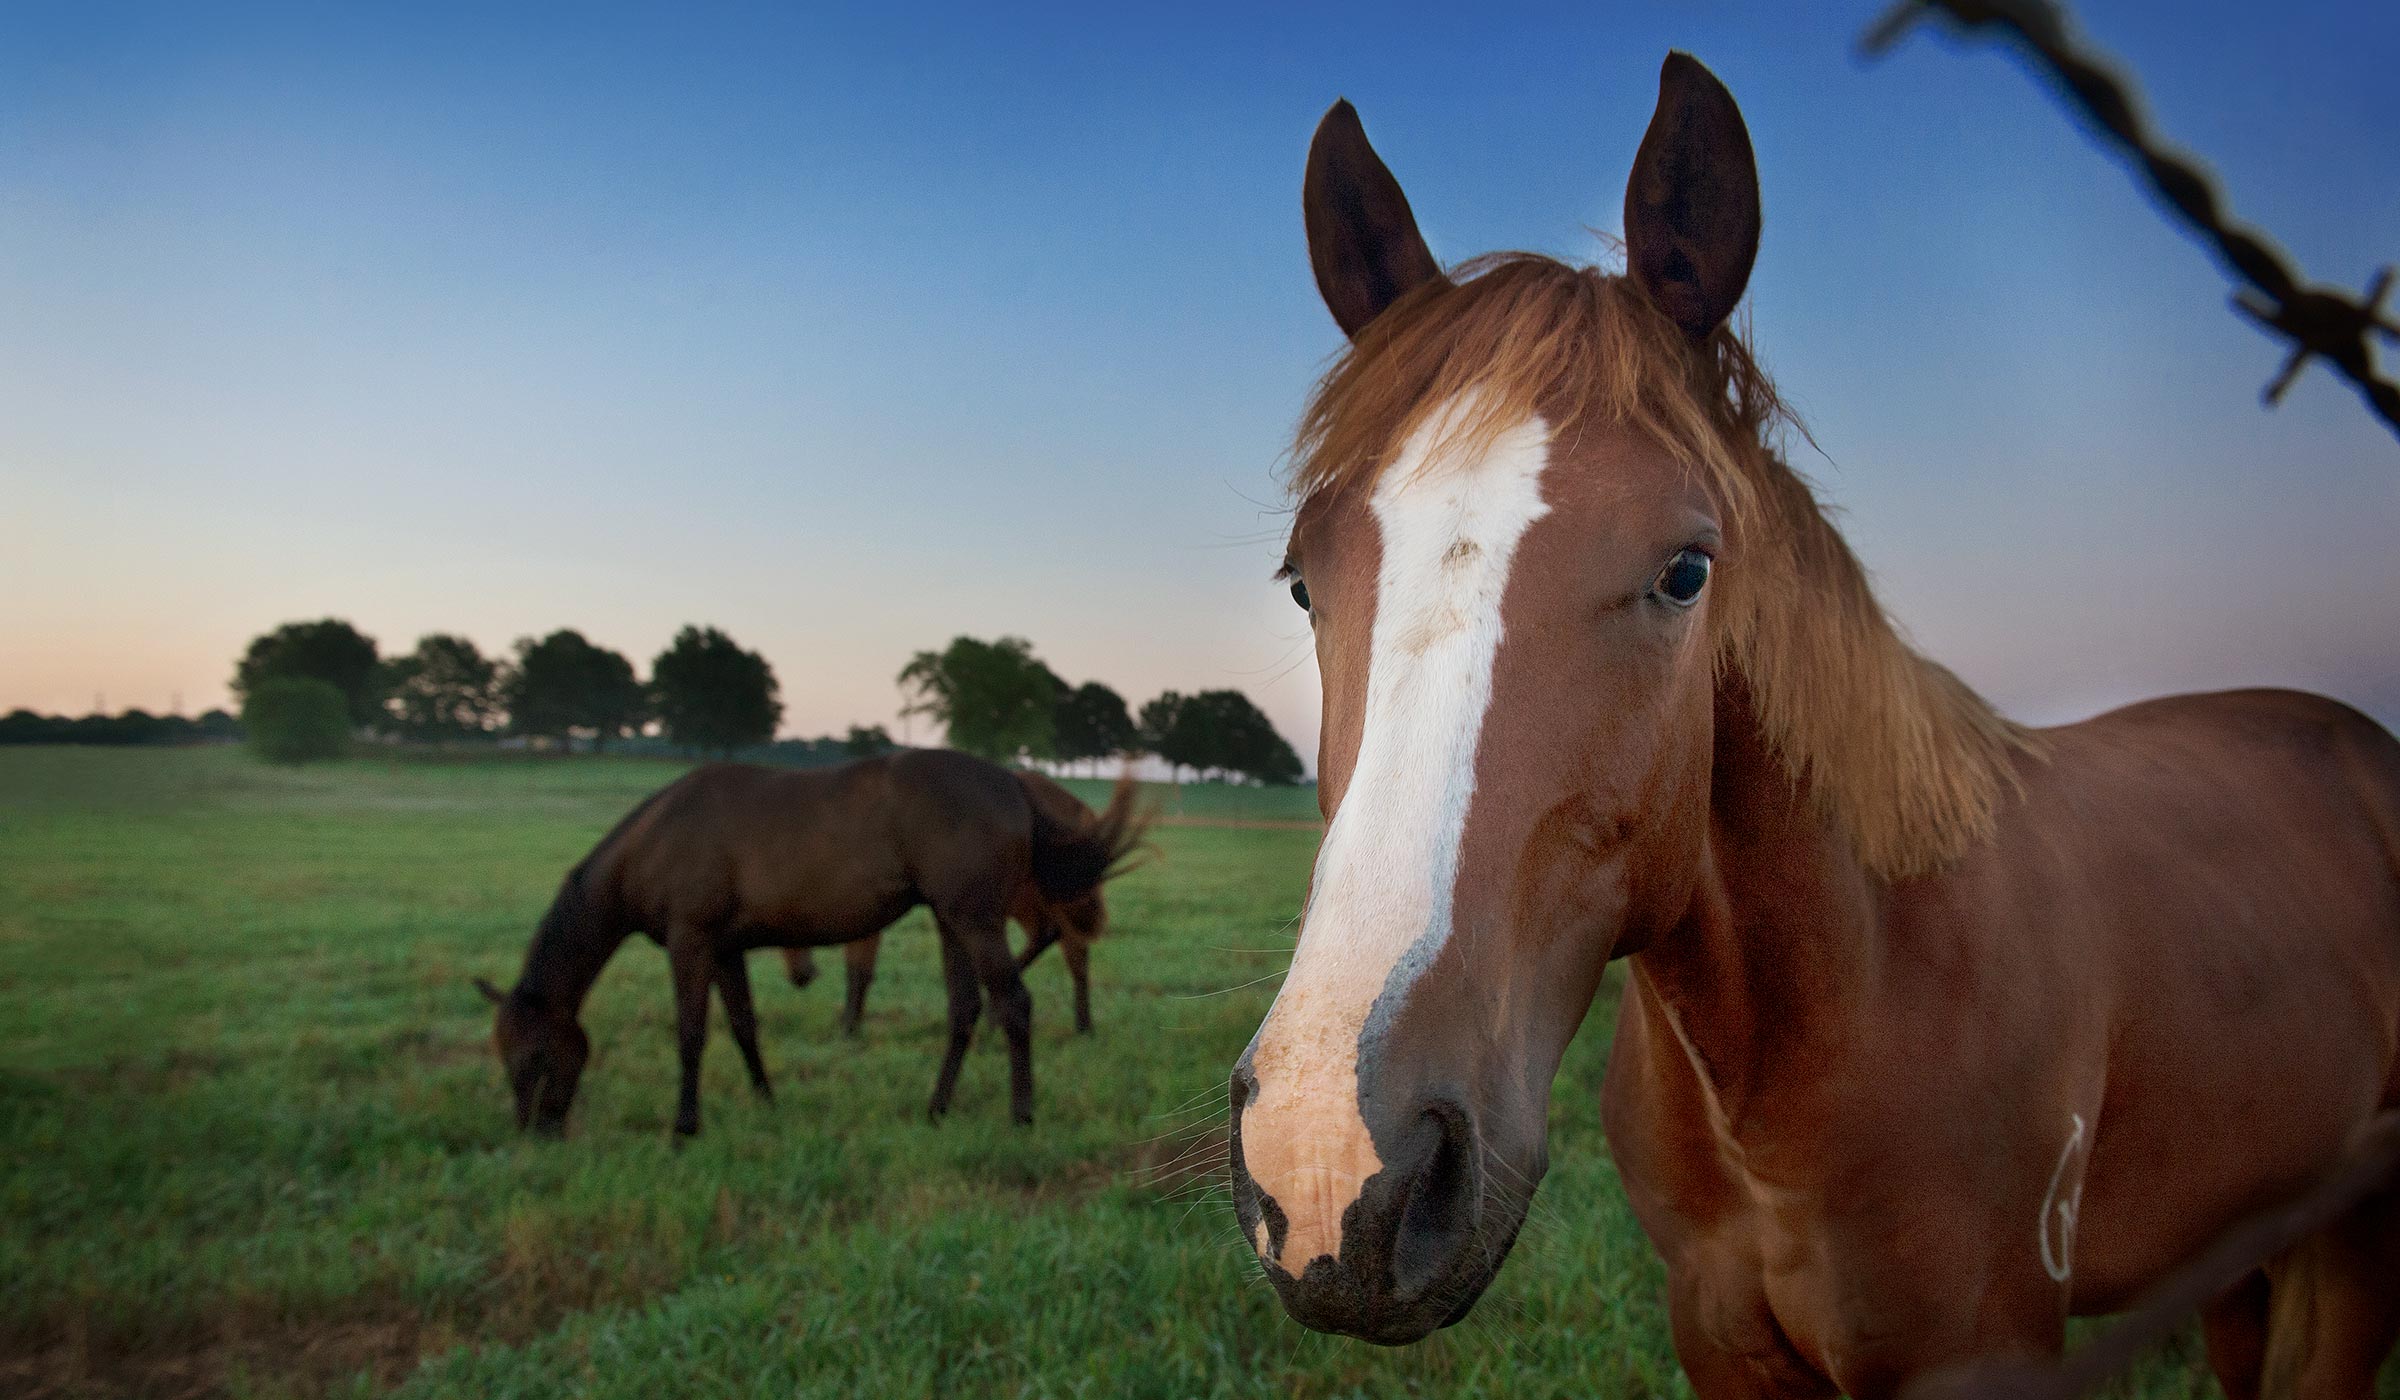 Brown horse in foreground near barb wire fence with horse grazing in background with dawn sky.